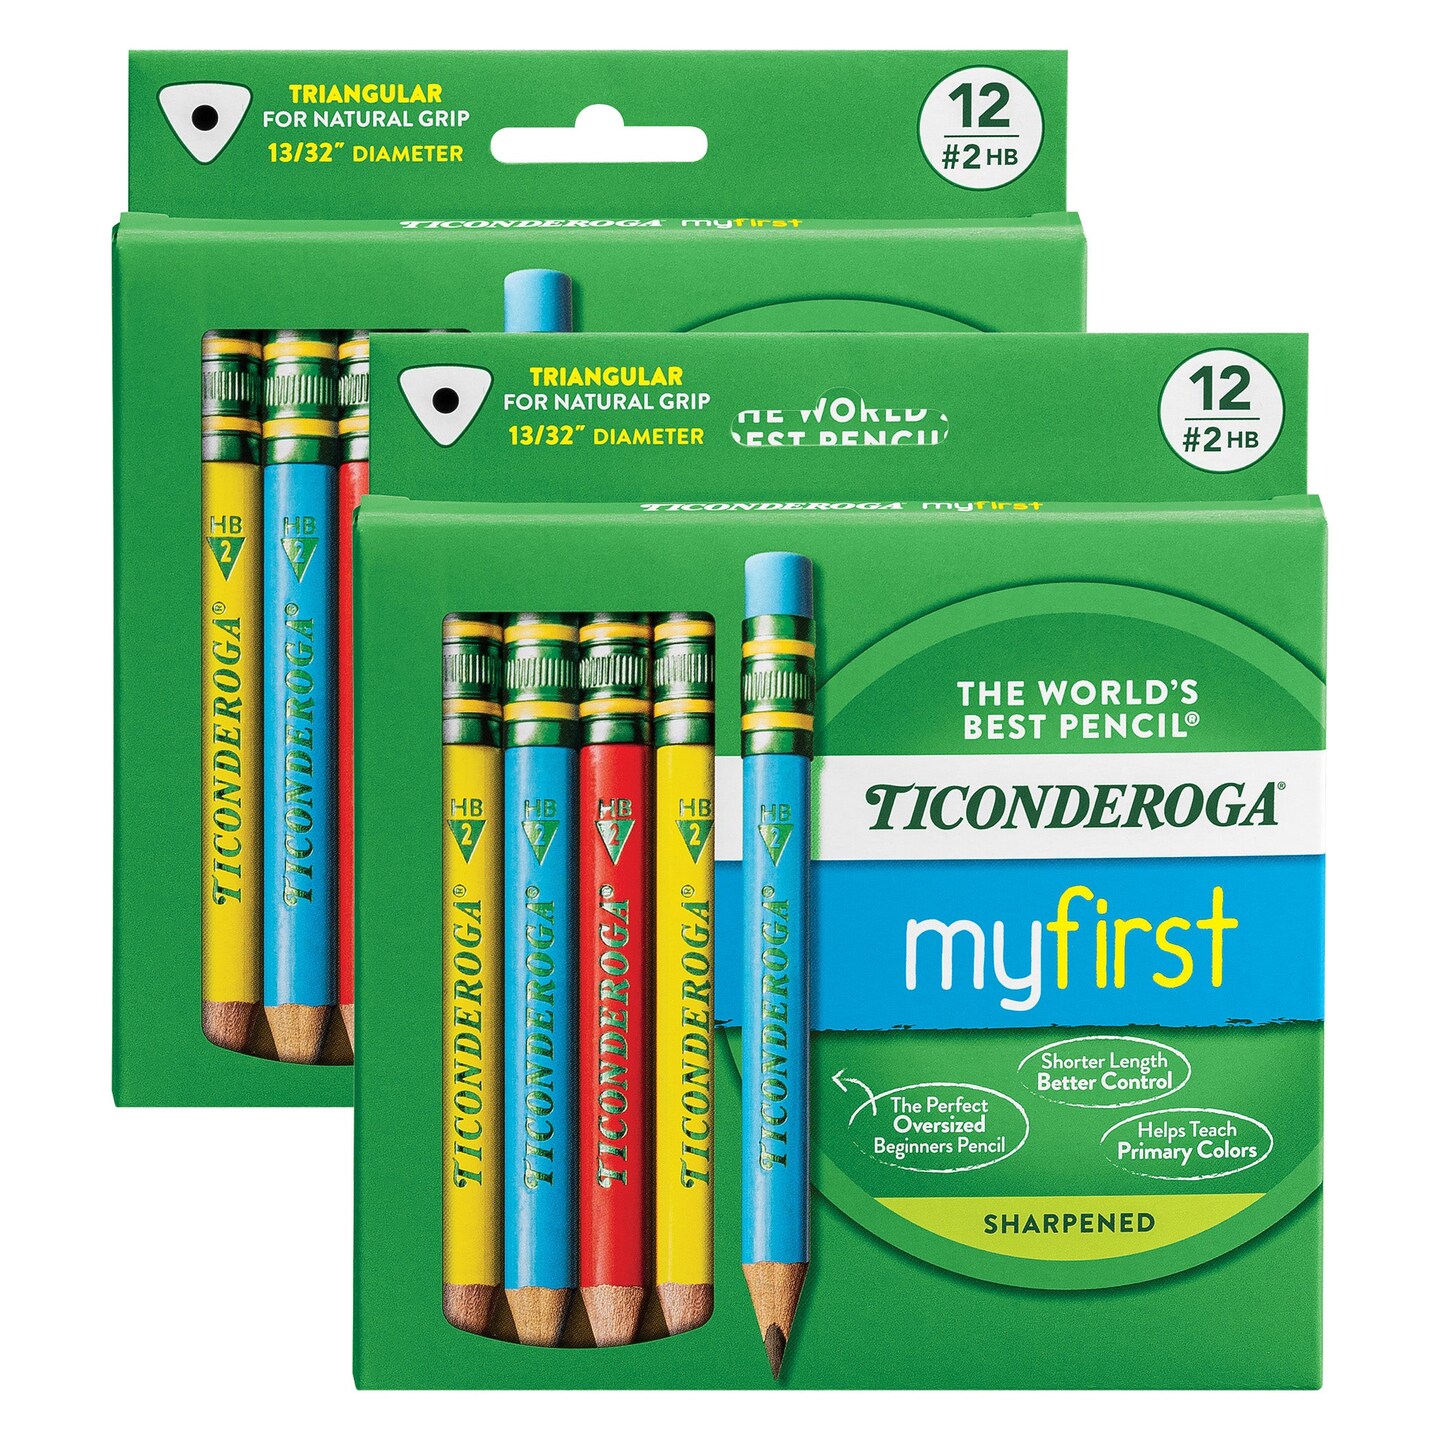 My First&#xAE; Short Wooden Pencils, Large Triangle Barrel, Sharpened, #2 HB Soft, With Eraser, Primary Colors, 12 Per Pack, 2 Packs